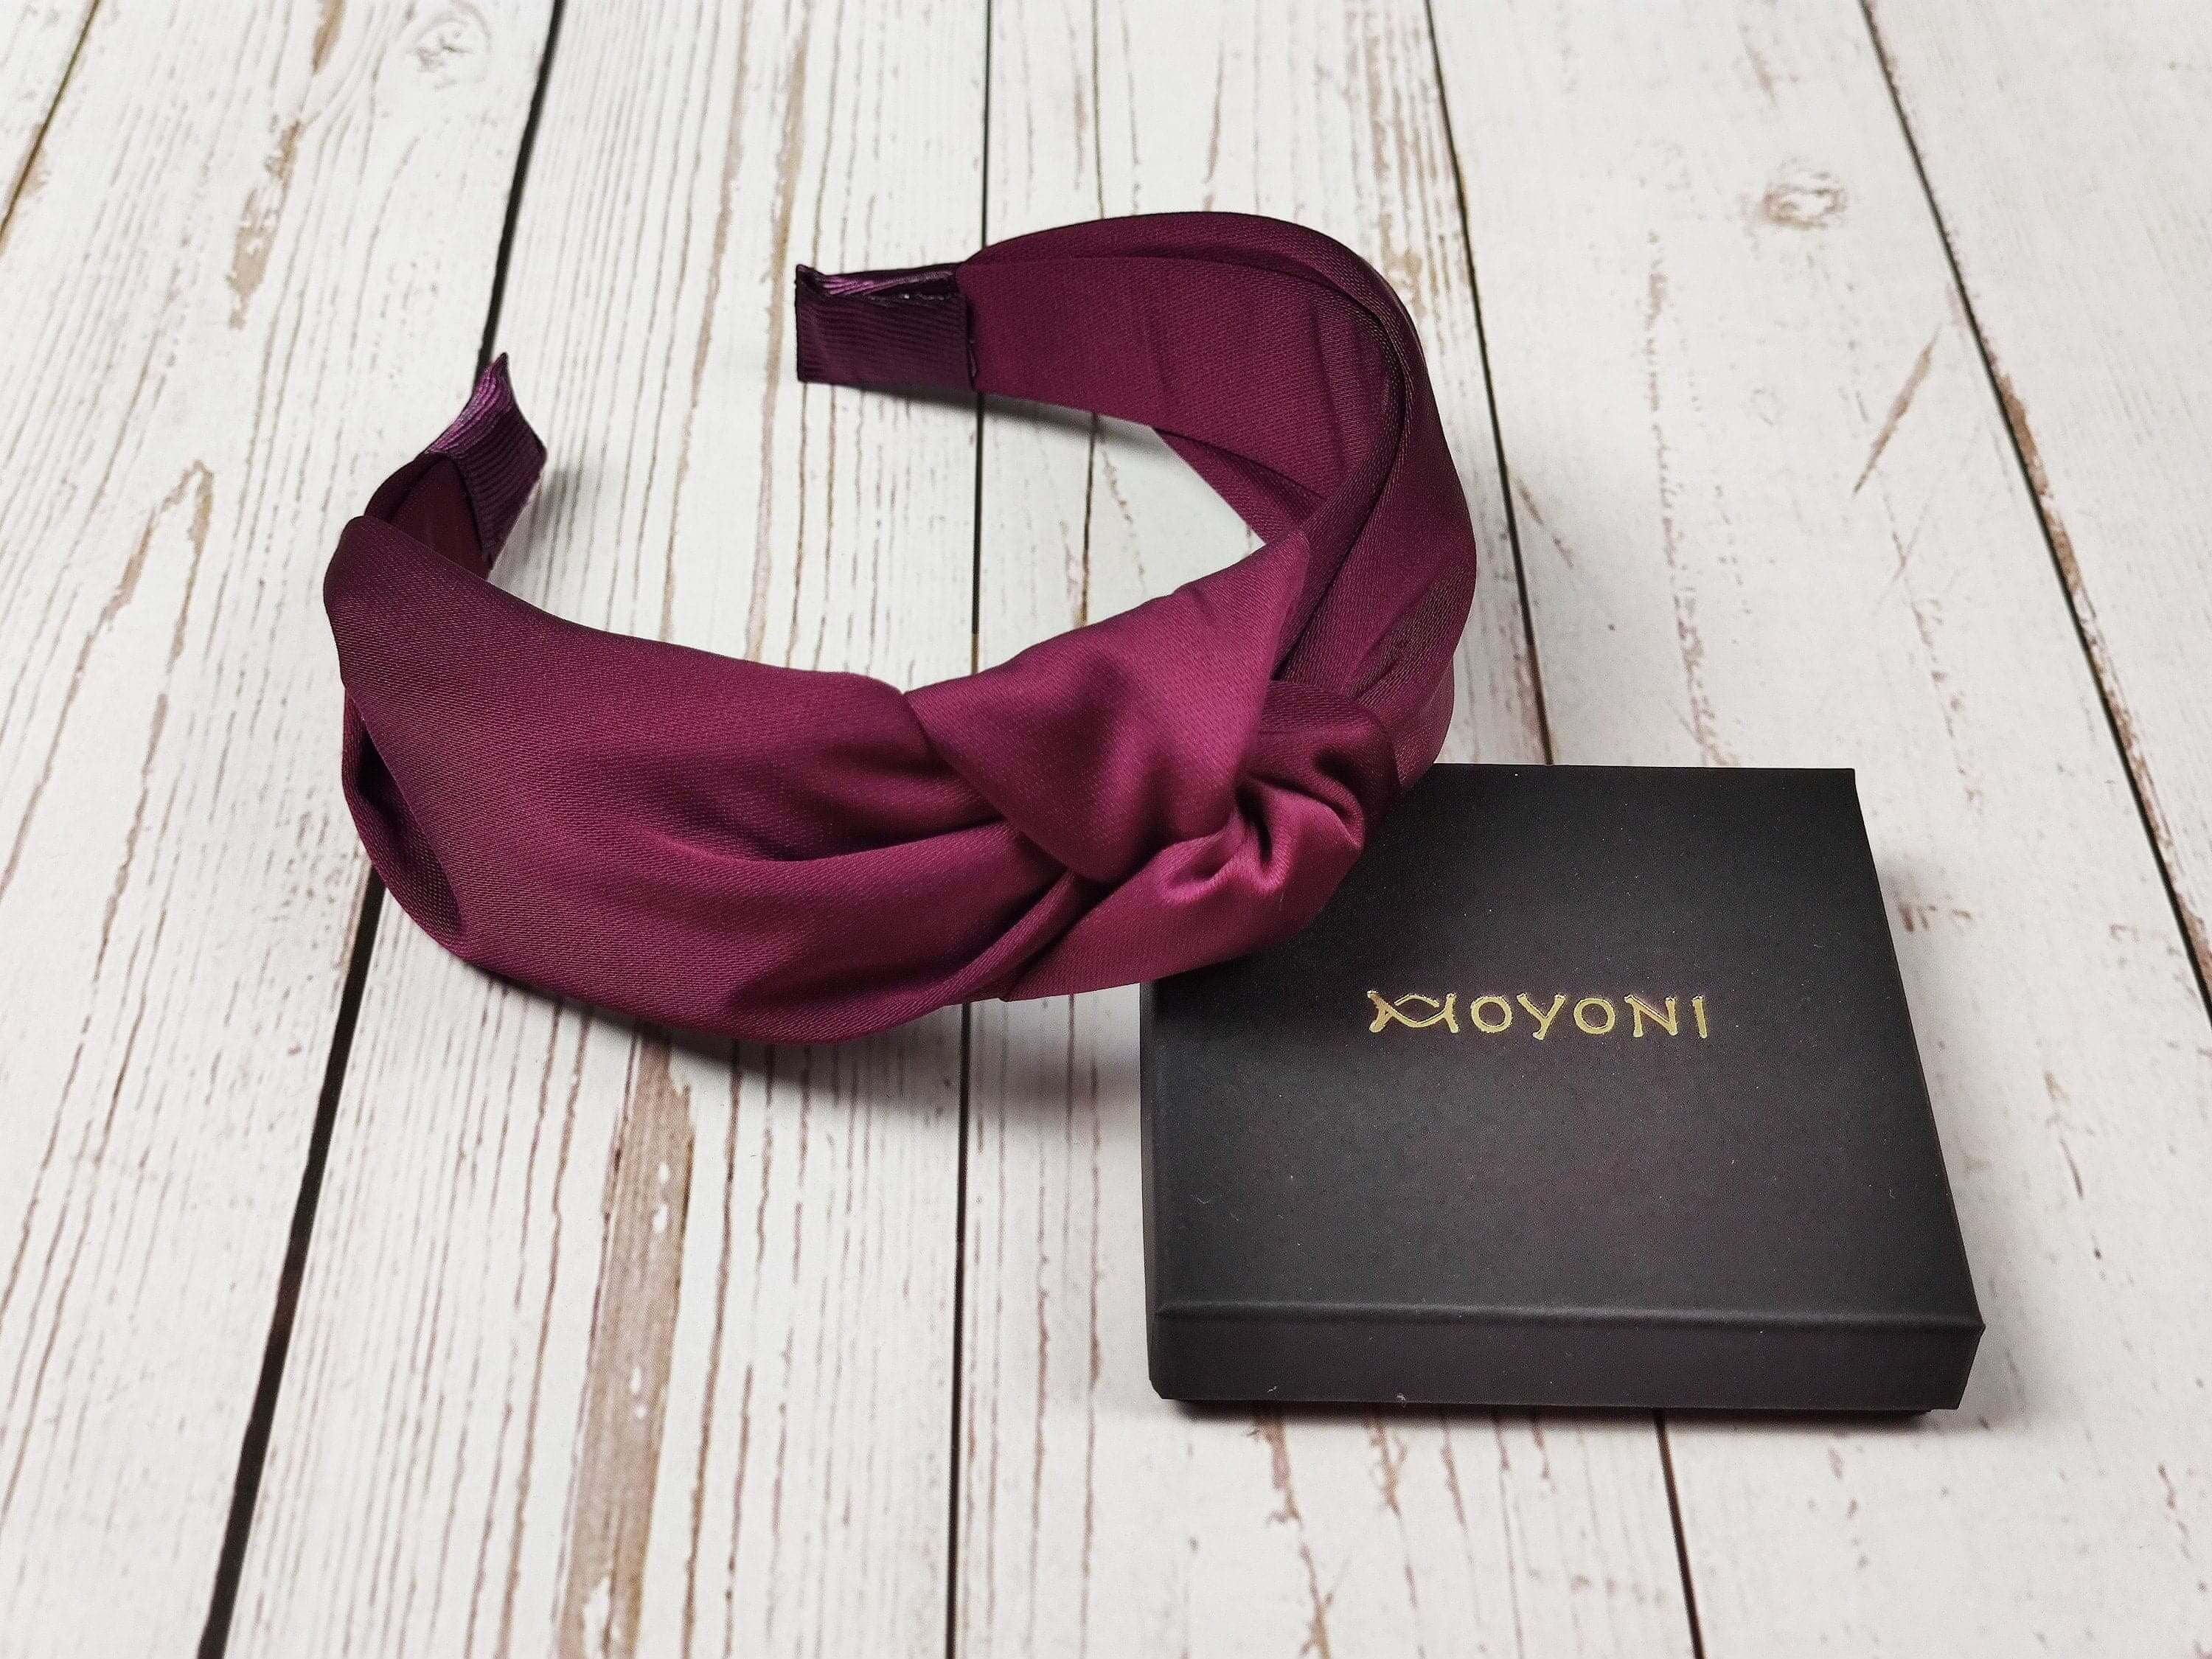 Luxurious Maroon Satin Knotted Headband for Women - Classic and Fashionable Dark Cherry Hairband without Padded available at Moyoni Design